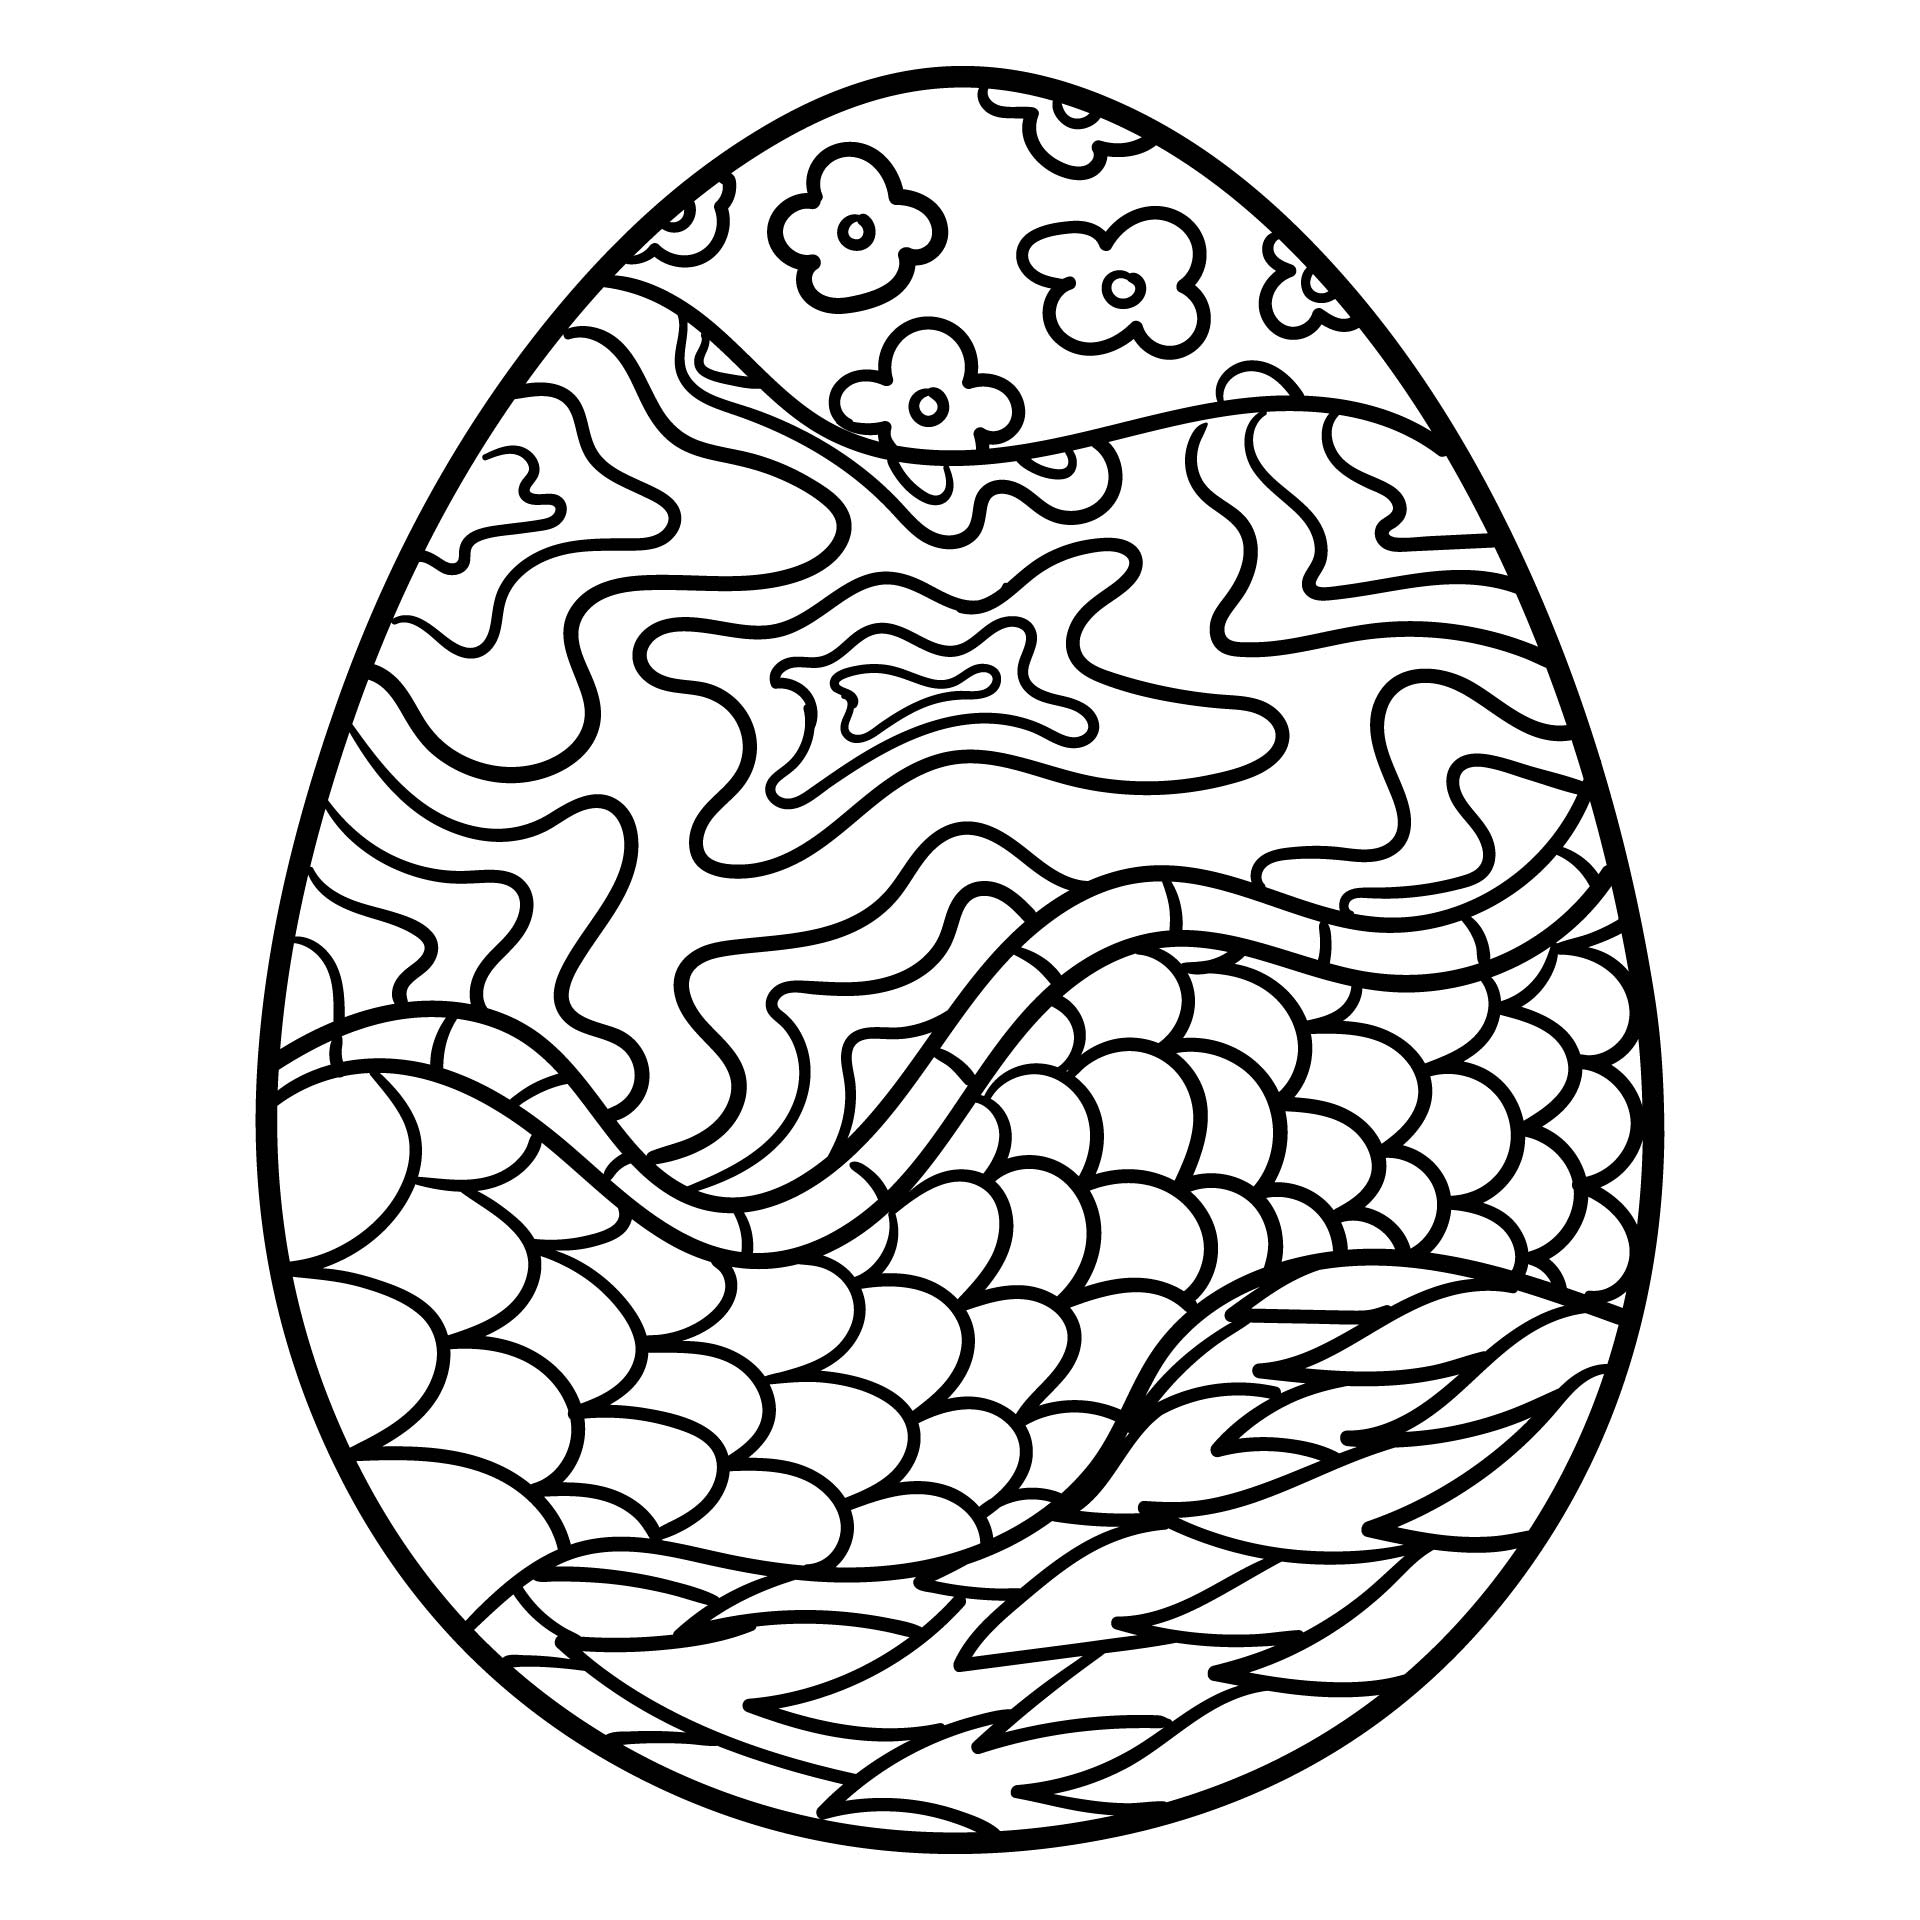 7 Best Free Printable Easter Egg Coloring Pages - printablee.com